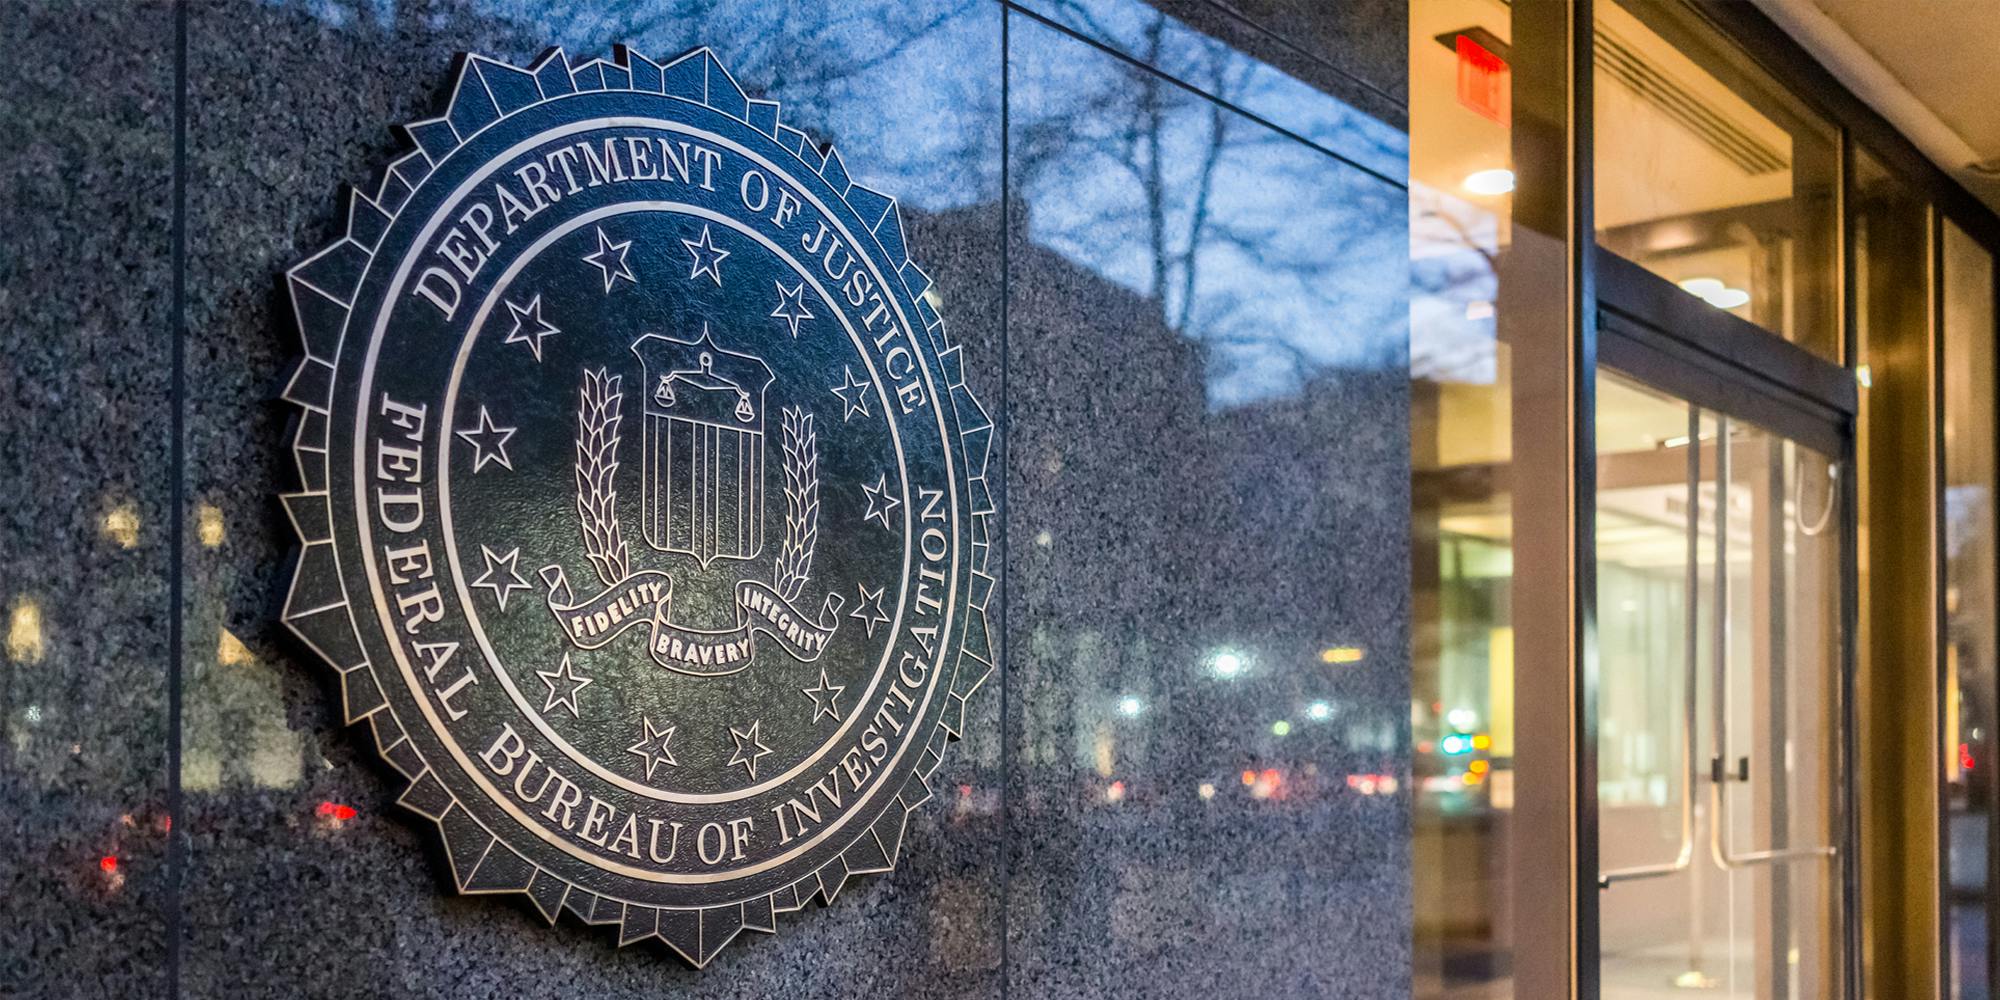 Department Of Justice Federal Bureau Of Investigation sign on wall with doorway